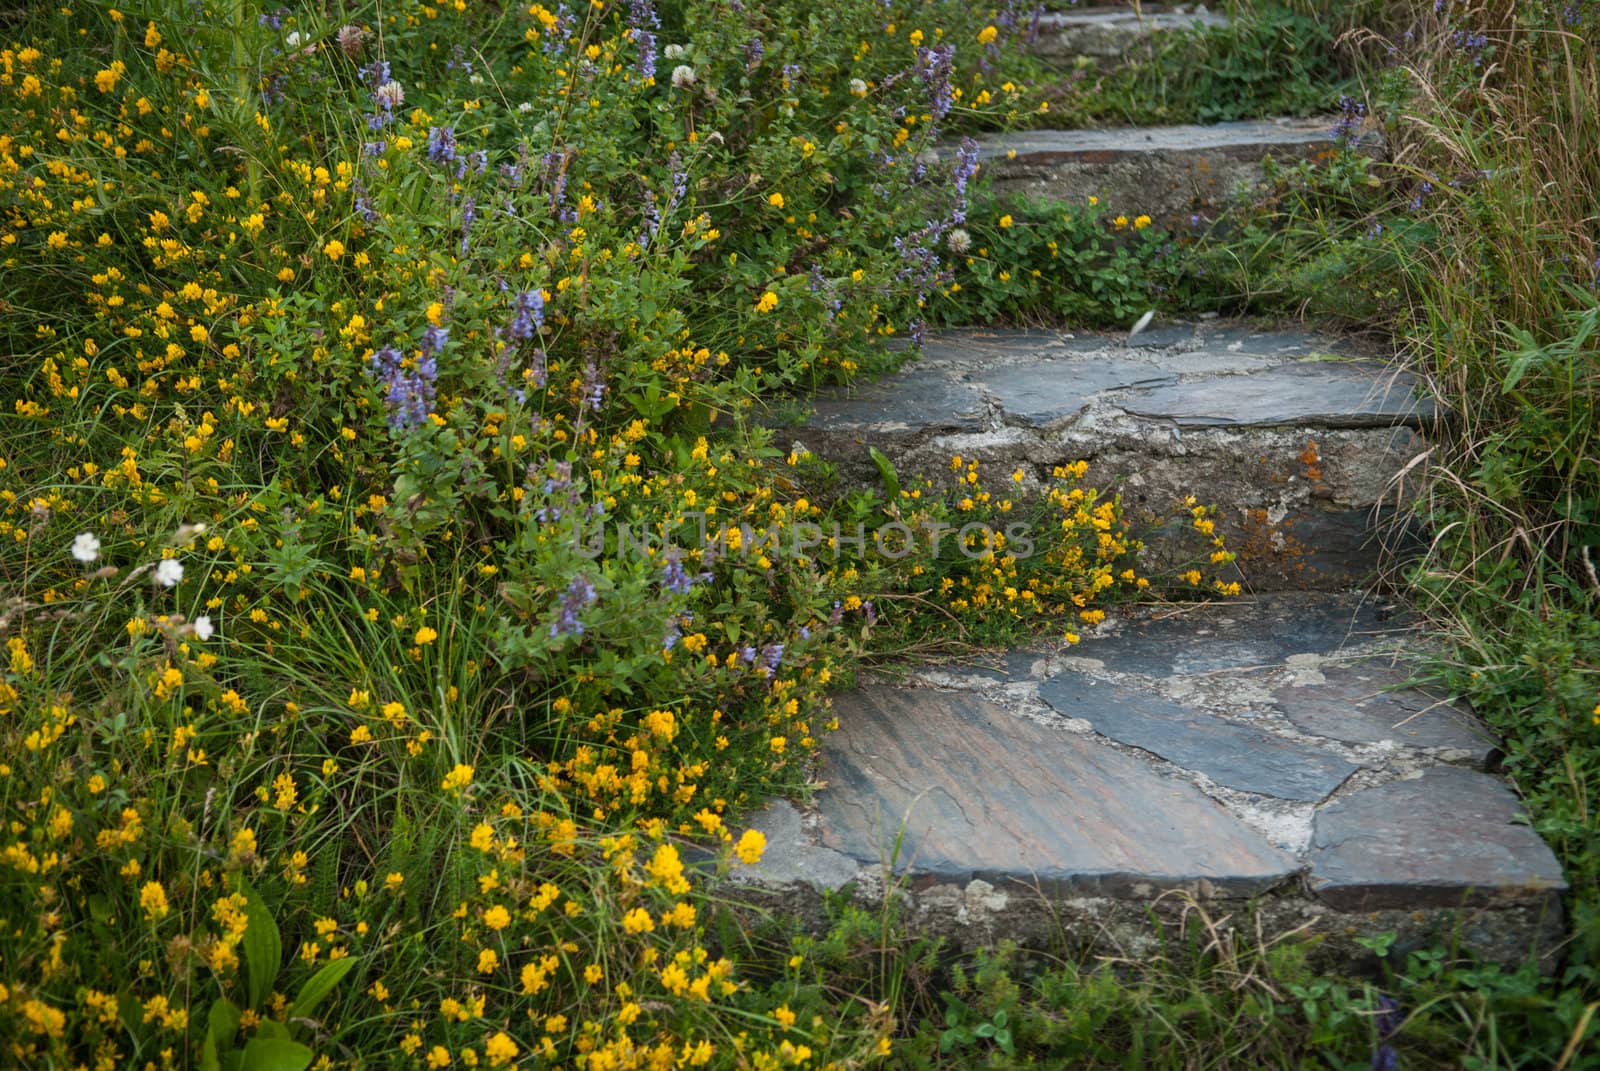 Stairs made of stone surrounded by yellow flowers